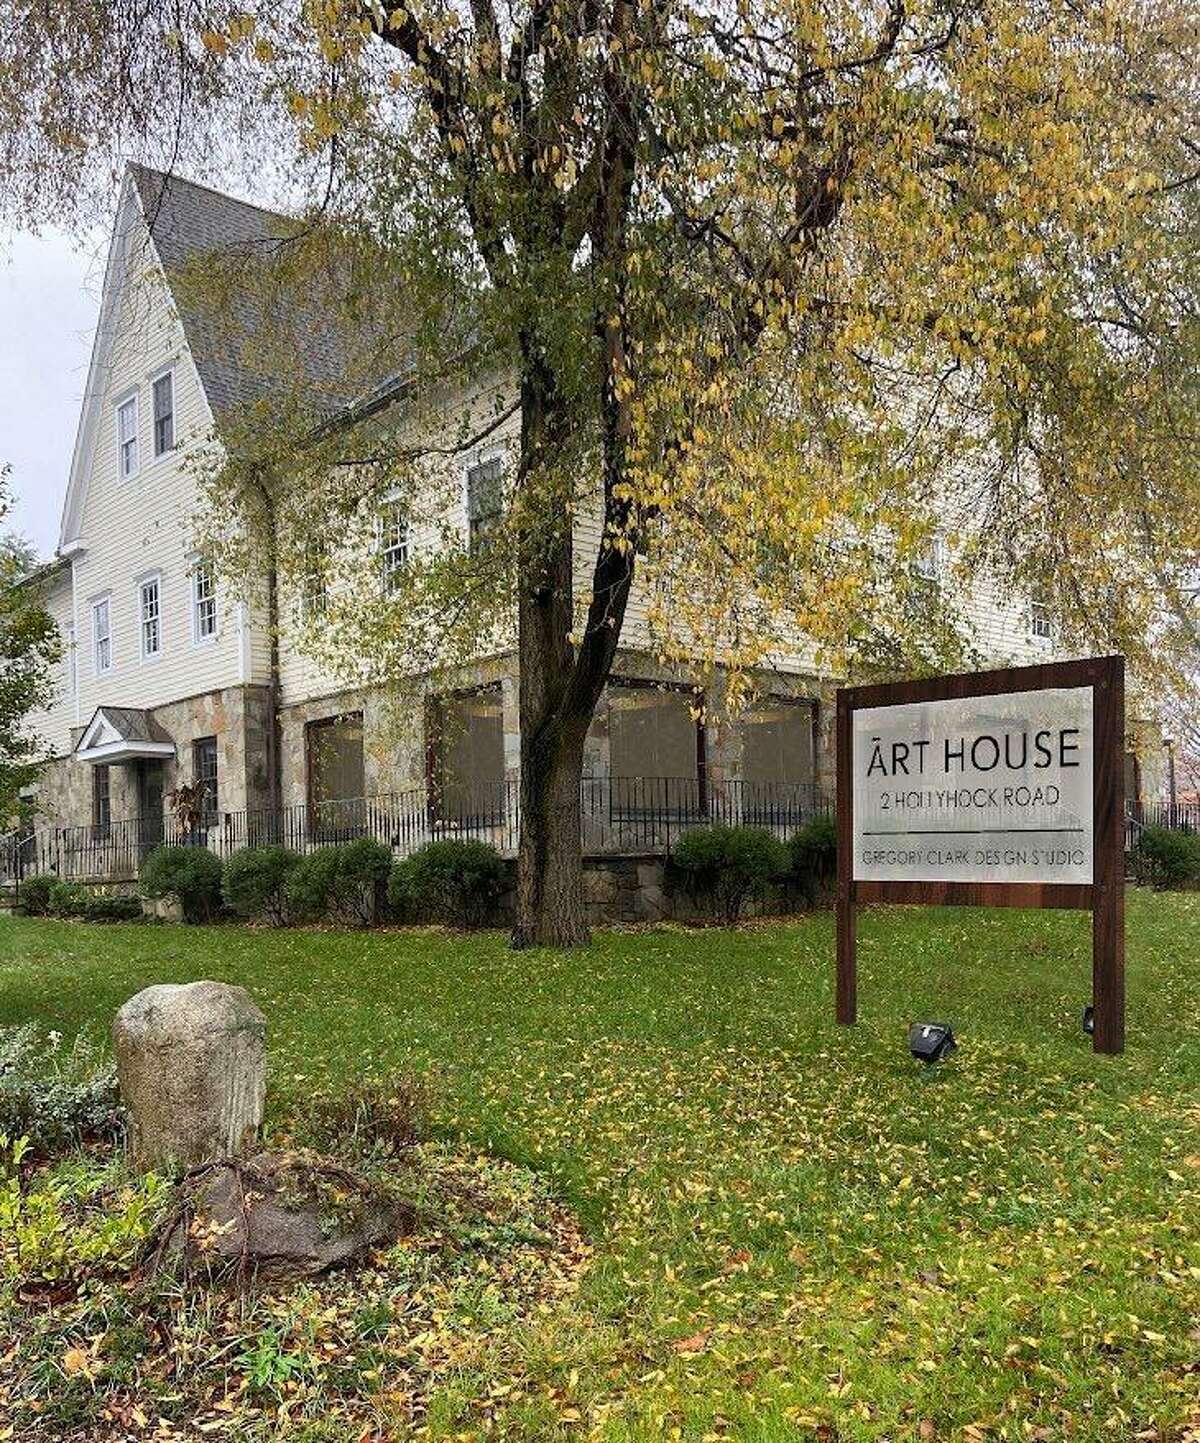 Art House, which sits at the intersection of Danbury Road and Hollyhock Road, is being proposed as a conversion from art studio and office space to apartments, several of which would be offered as affordable.